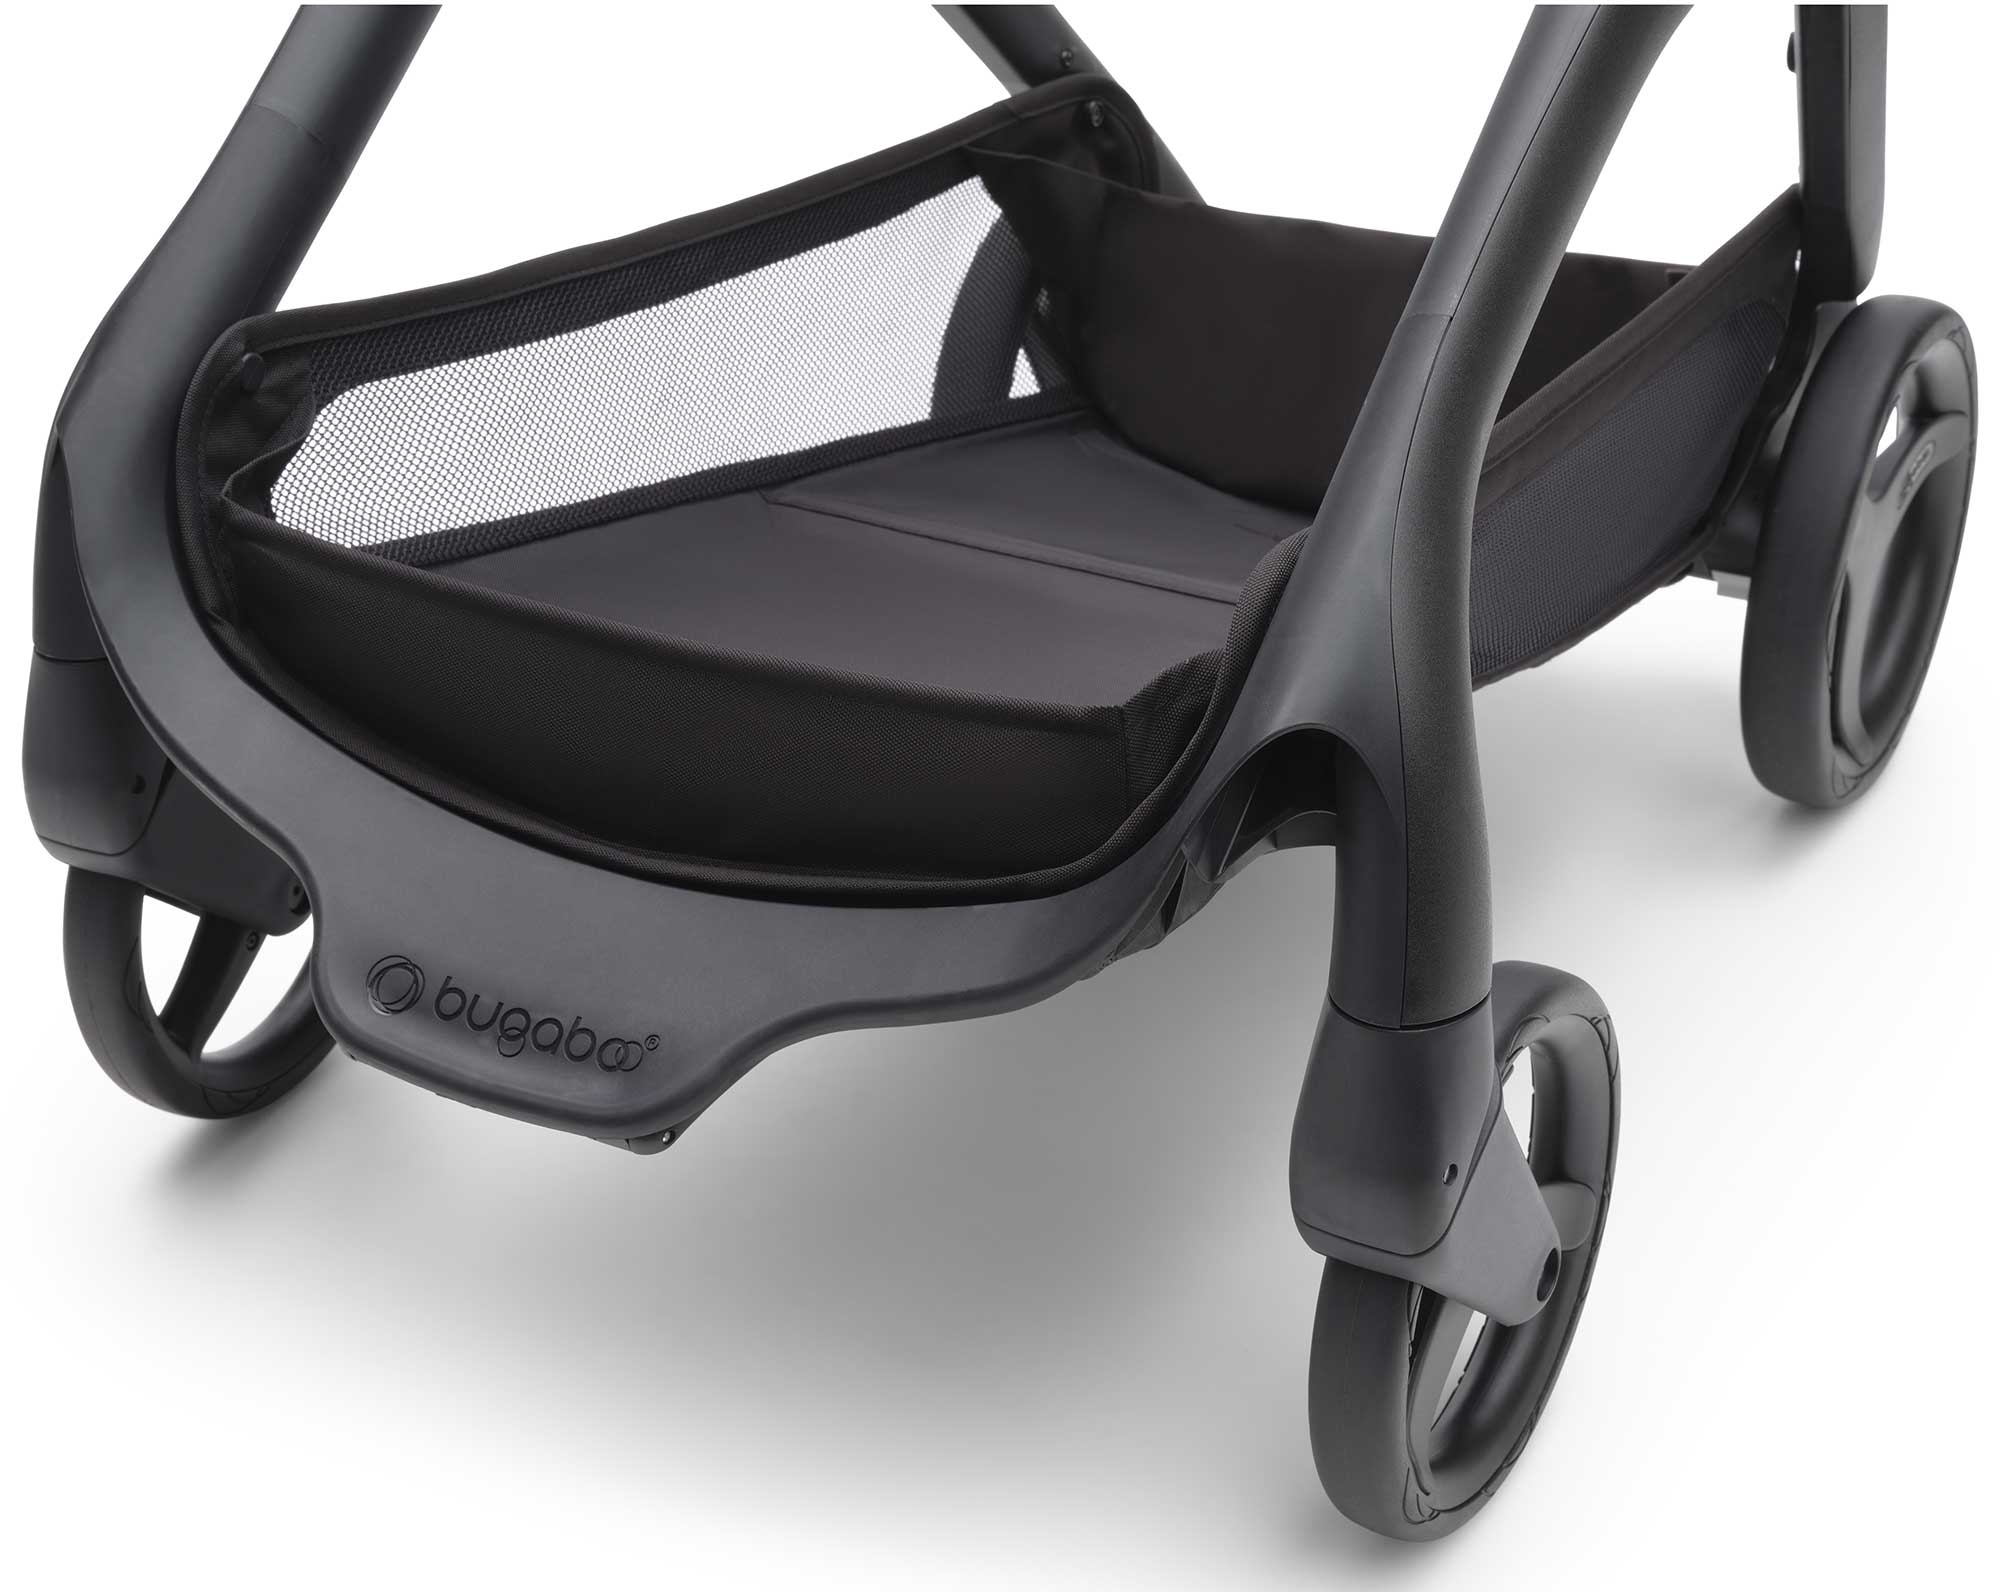 Bugaboo Travel Systems Bugaboo Dragonfly Pebble 360 Pro Travel System - Black/Forest Green 13818-BLK-FOR-GRN